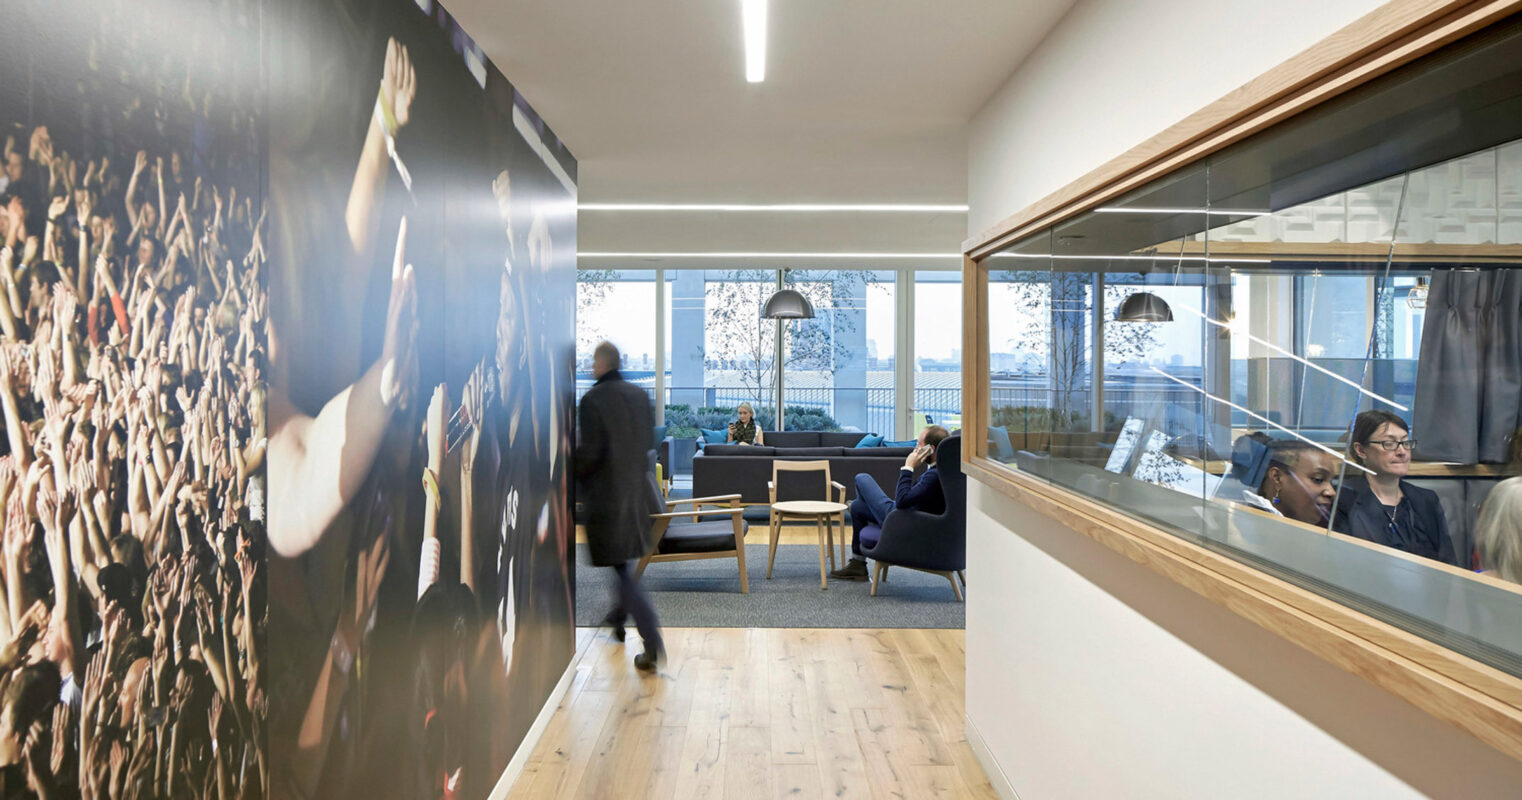 Modern office lobby featuring hardwood floors, minimalist furniture, a large photo mural wall with a crowd scene, sleek horizontal lighting, and a glimpse of an adjoining workspace through interior windows.